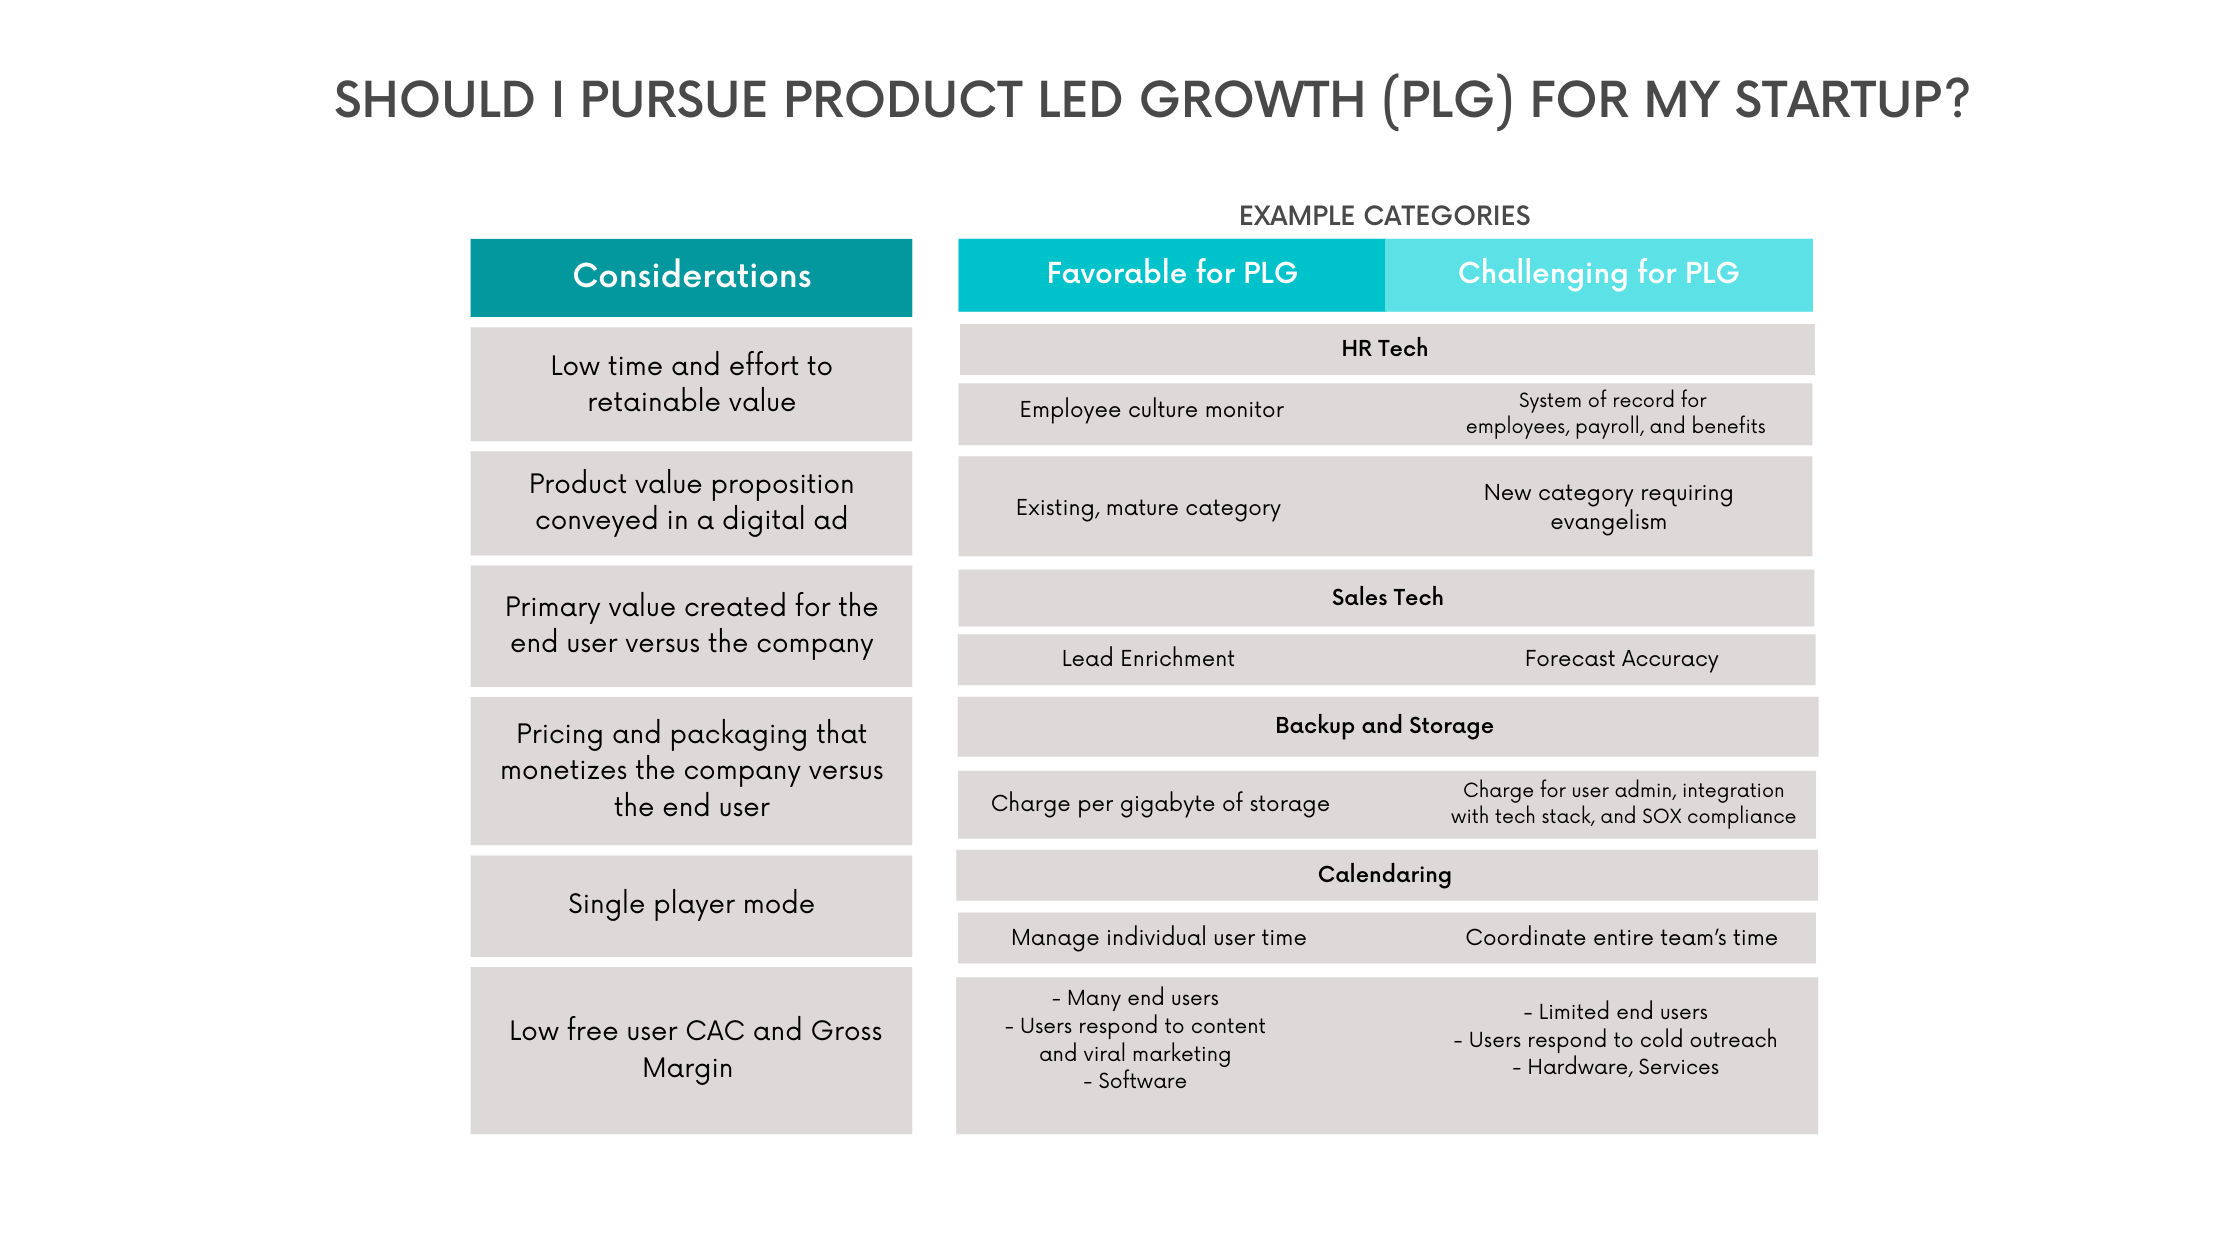 Product Led Growth Considerations